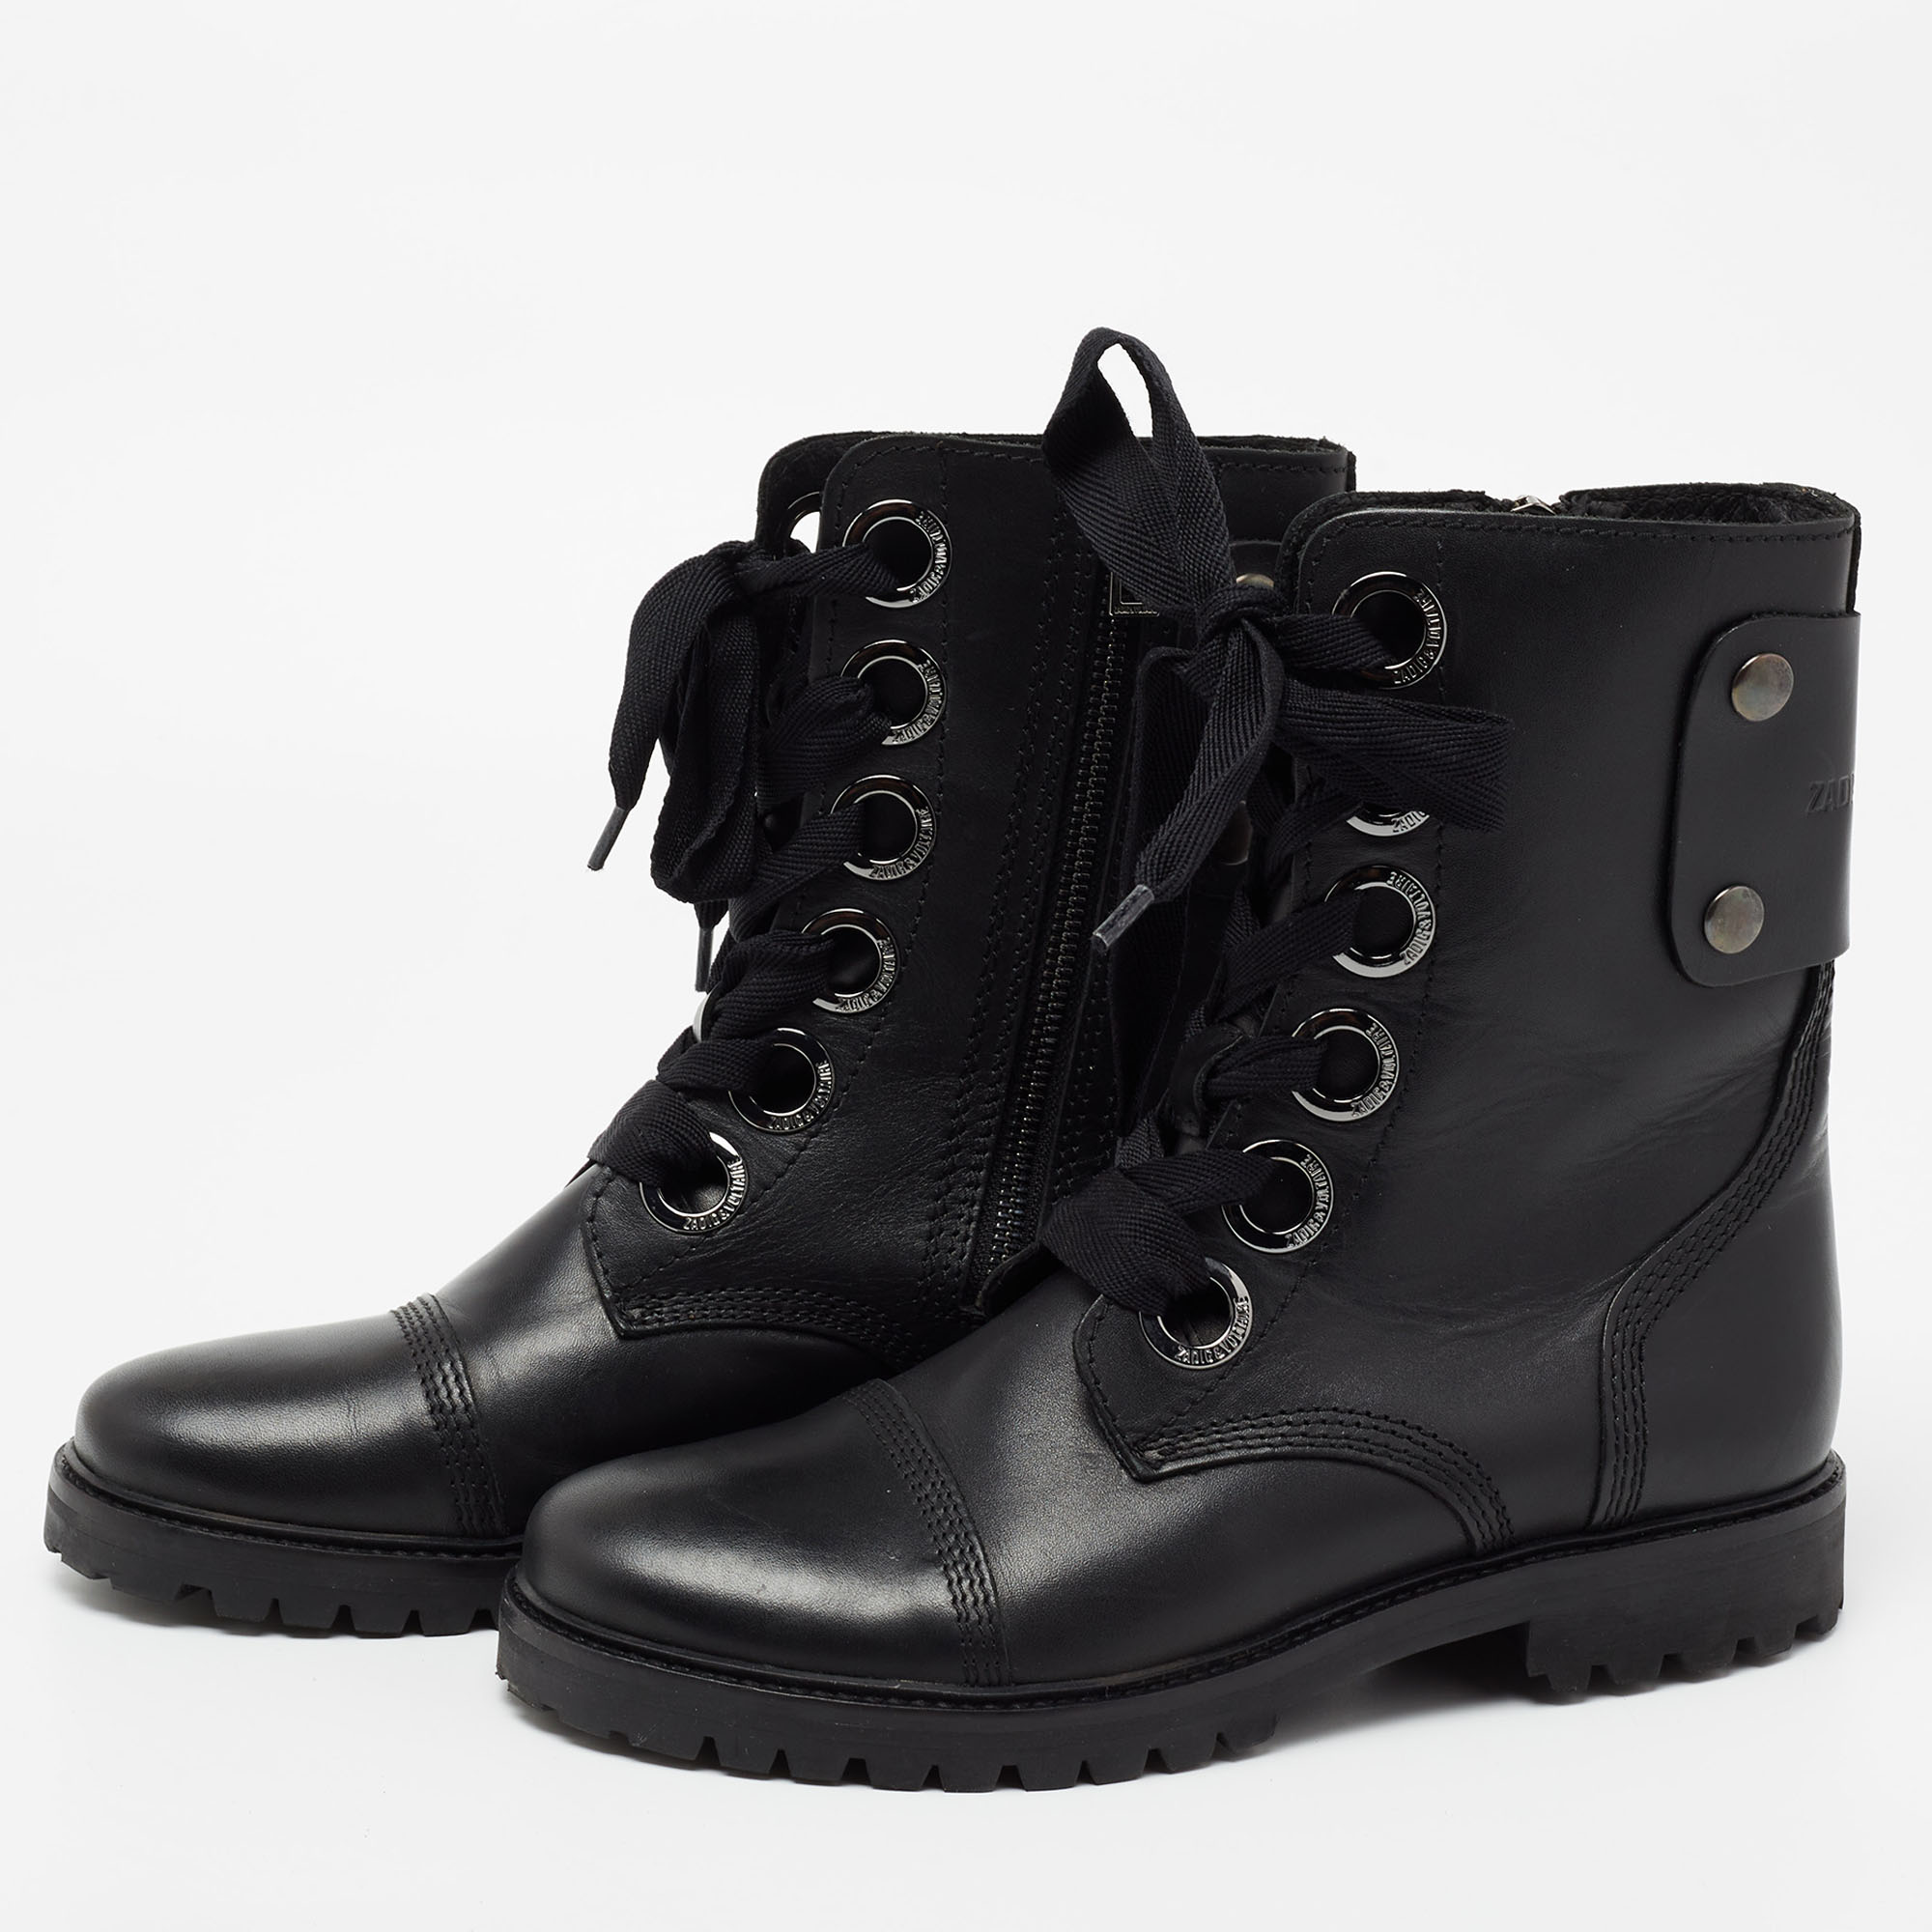 

Zadig & Voltaire Black Leather Combat Boots Size